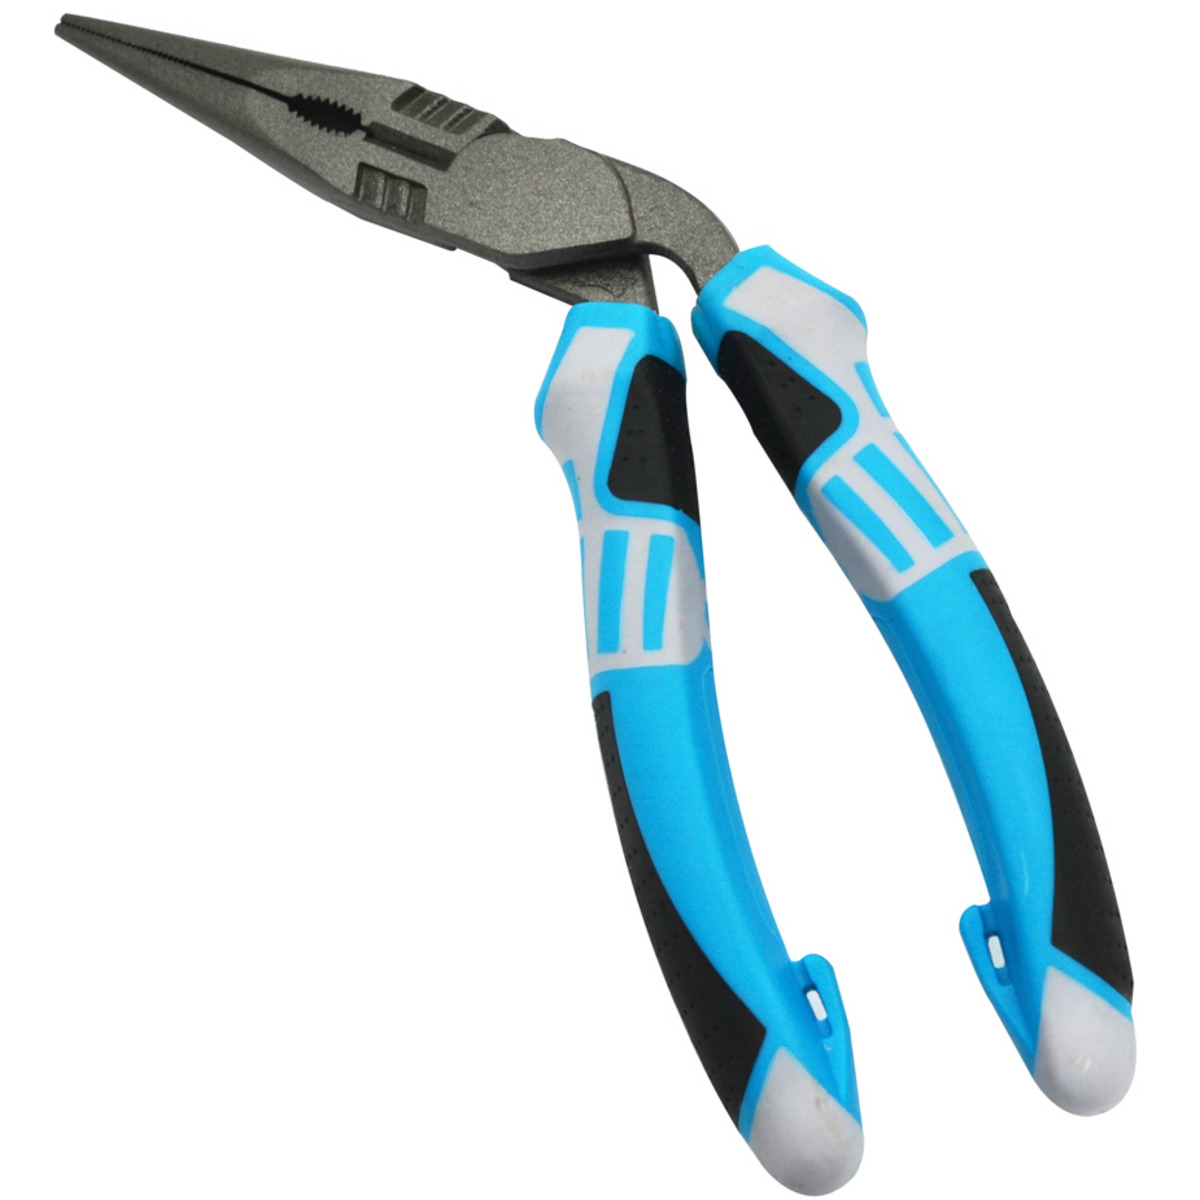 Mikado Pliers - LONG AND CURVED CR V 20.3 cm